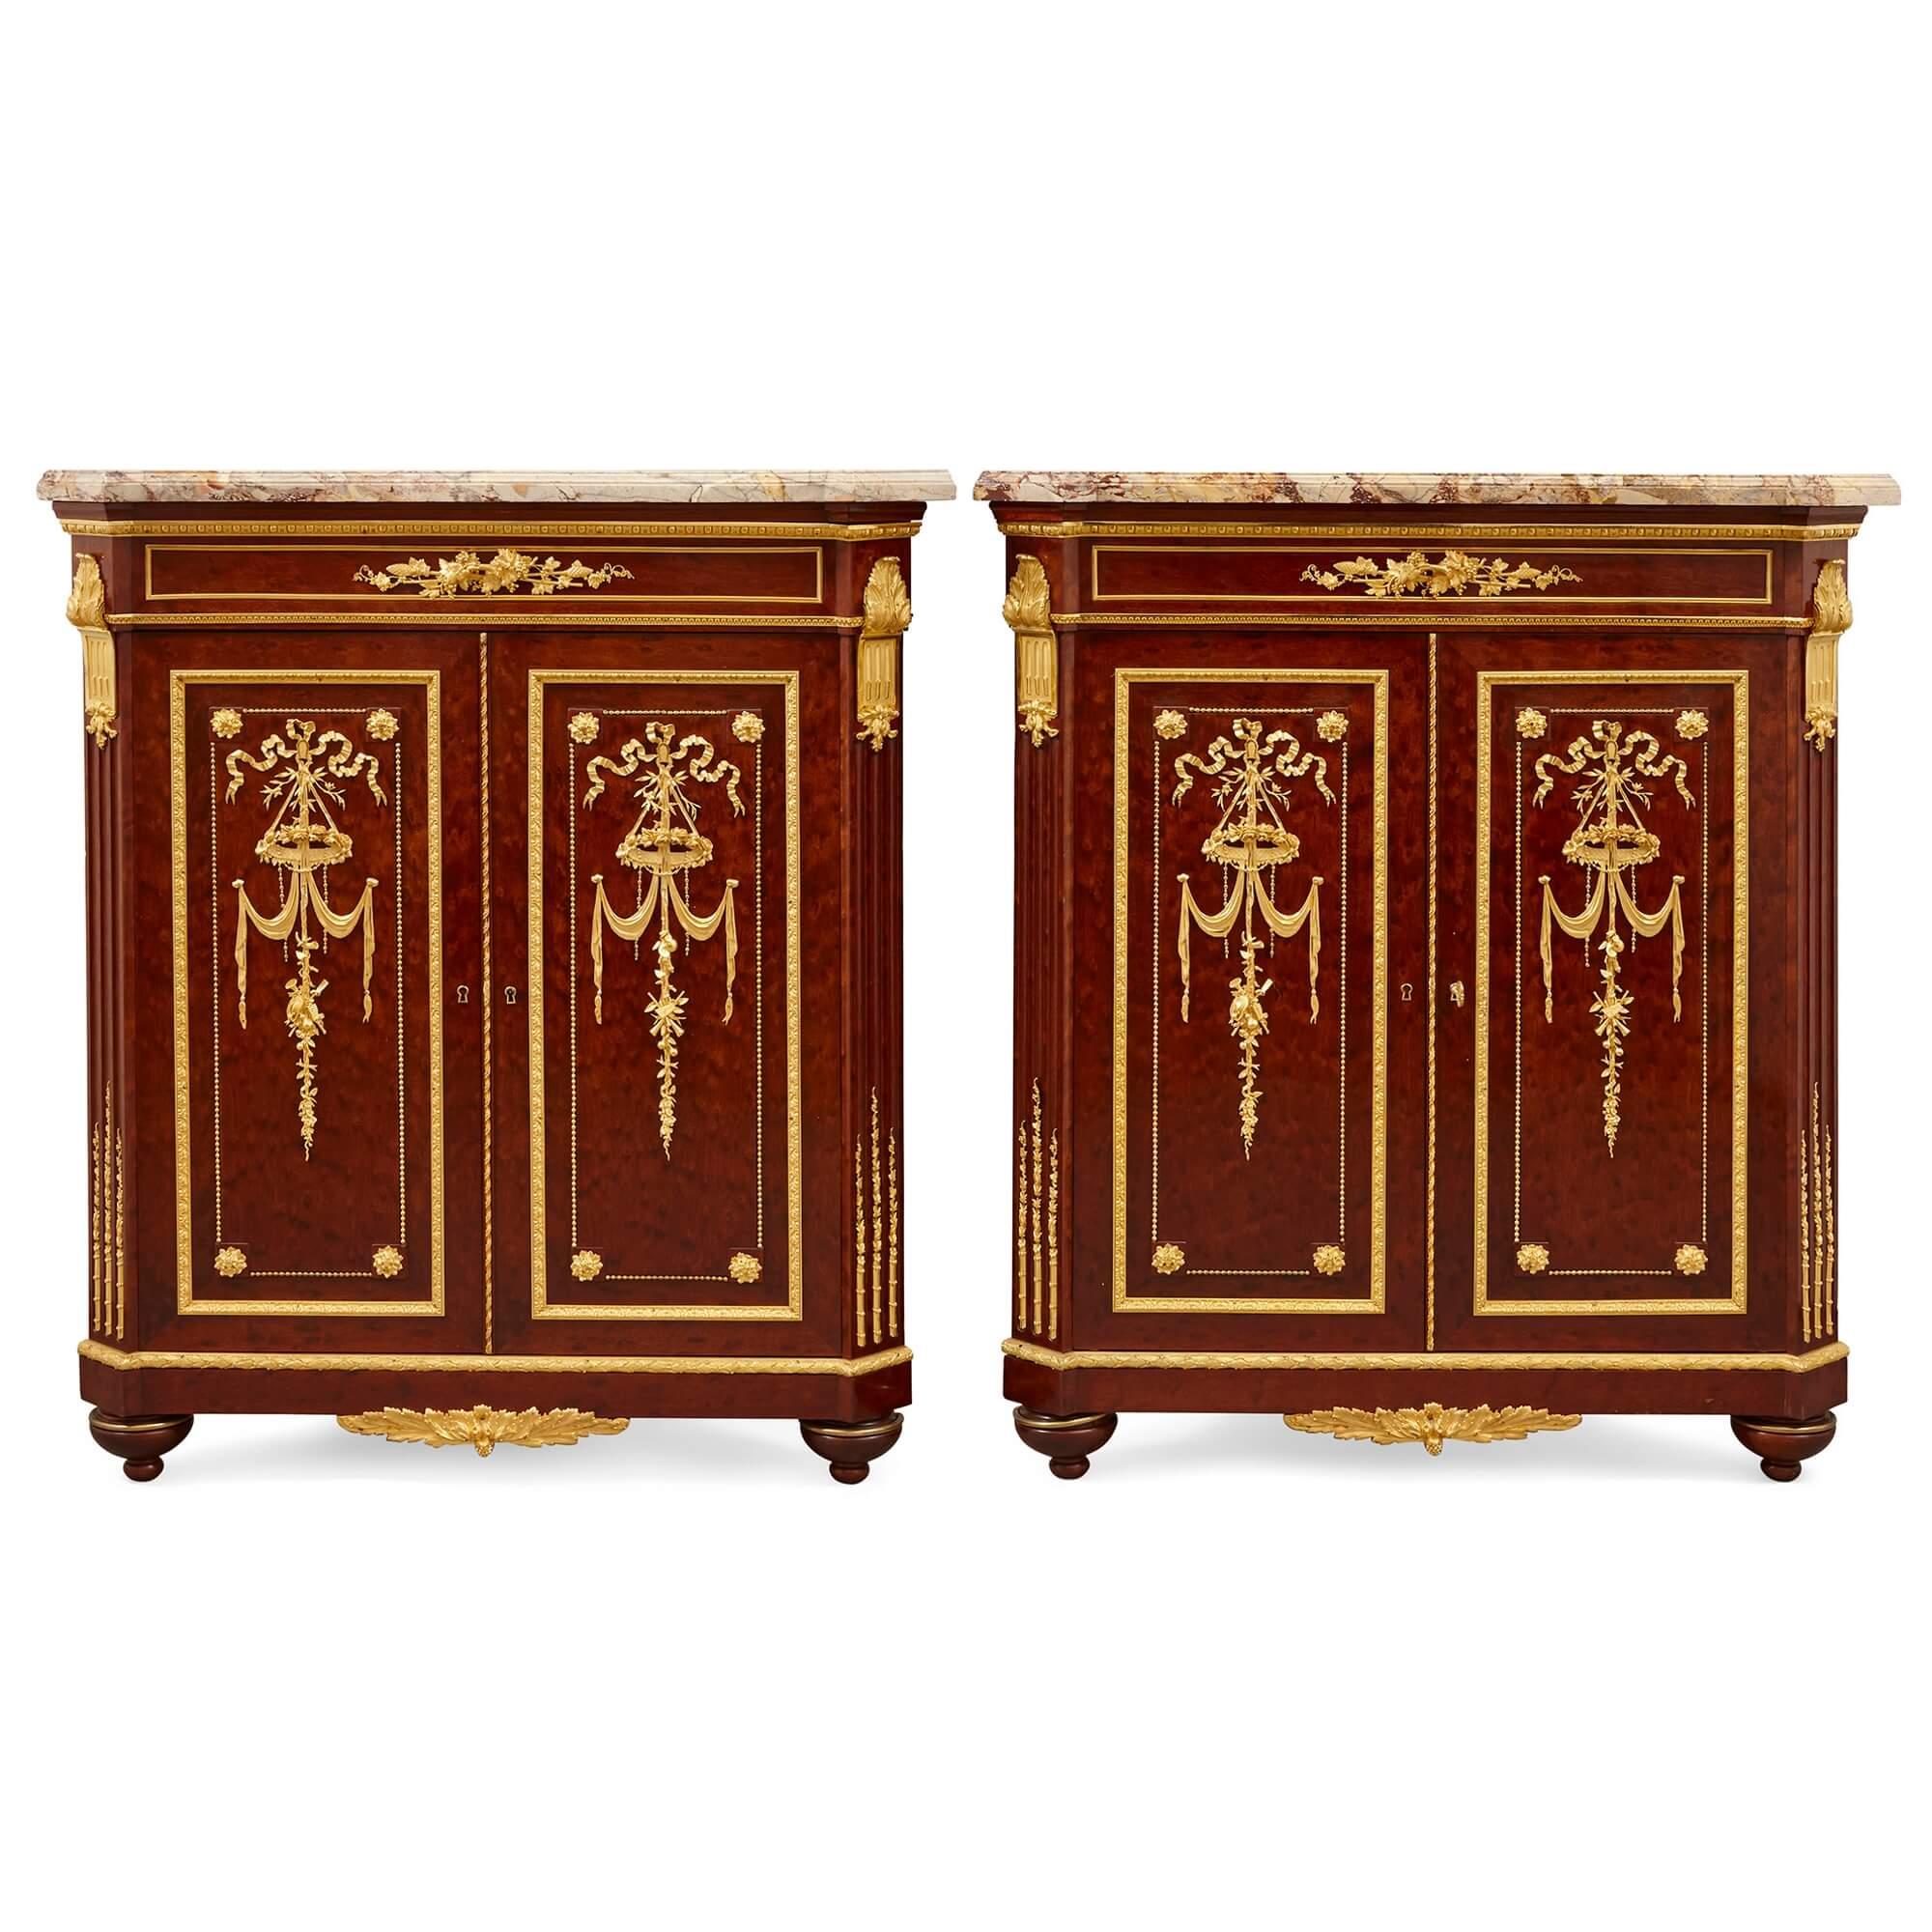 Pair of antique ormolu mounted and mahogany corner cabinets by Grohé Frères
French, c. 1860
Height 102cm, width 89cm, depth 47cm

This stunning pair of ormolu and mahogany corner cabinets were made by Grohé Frères in France in around 1860. The firm